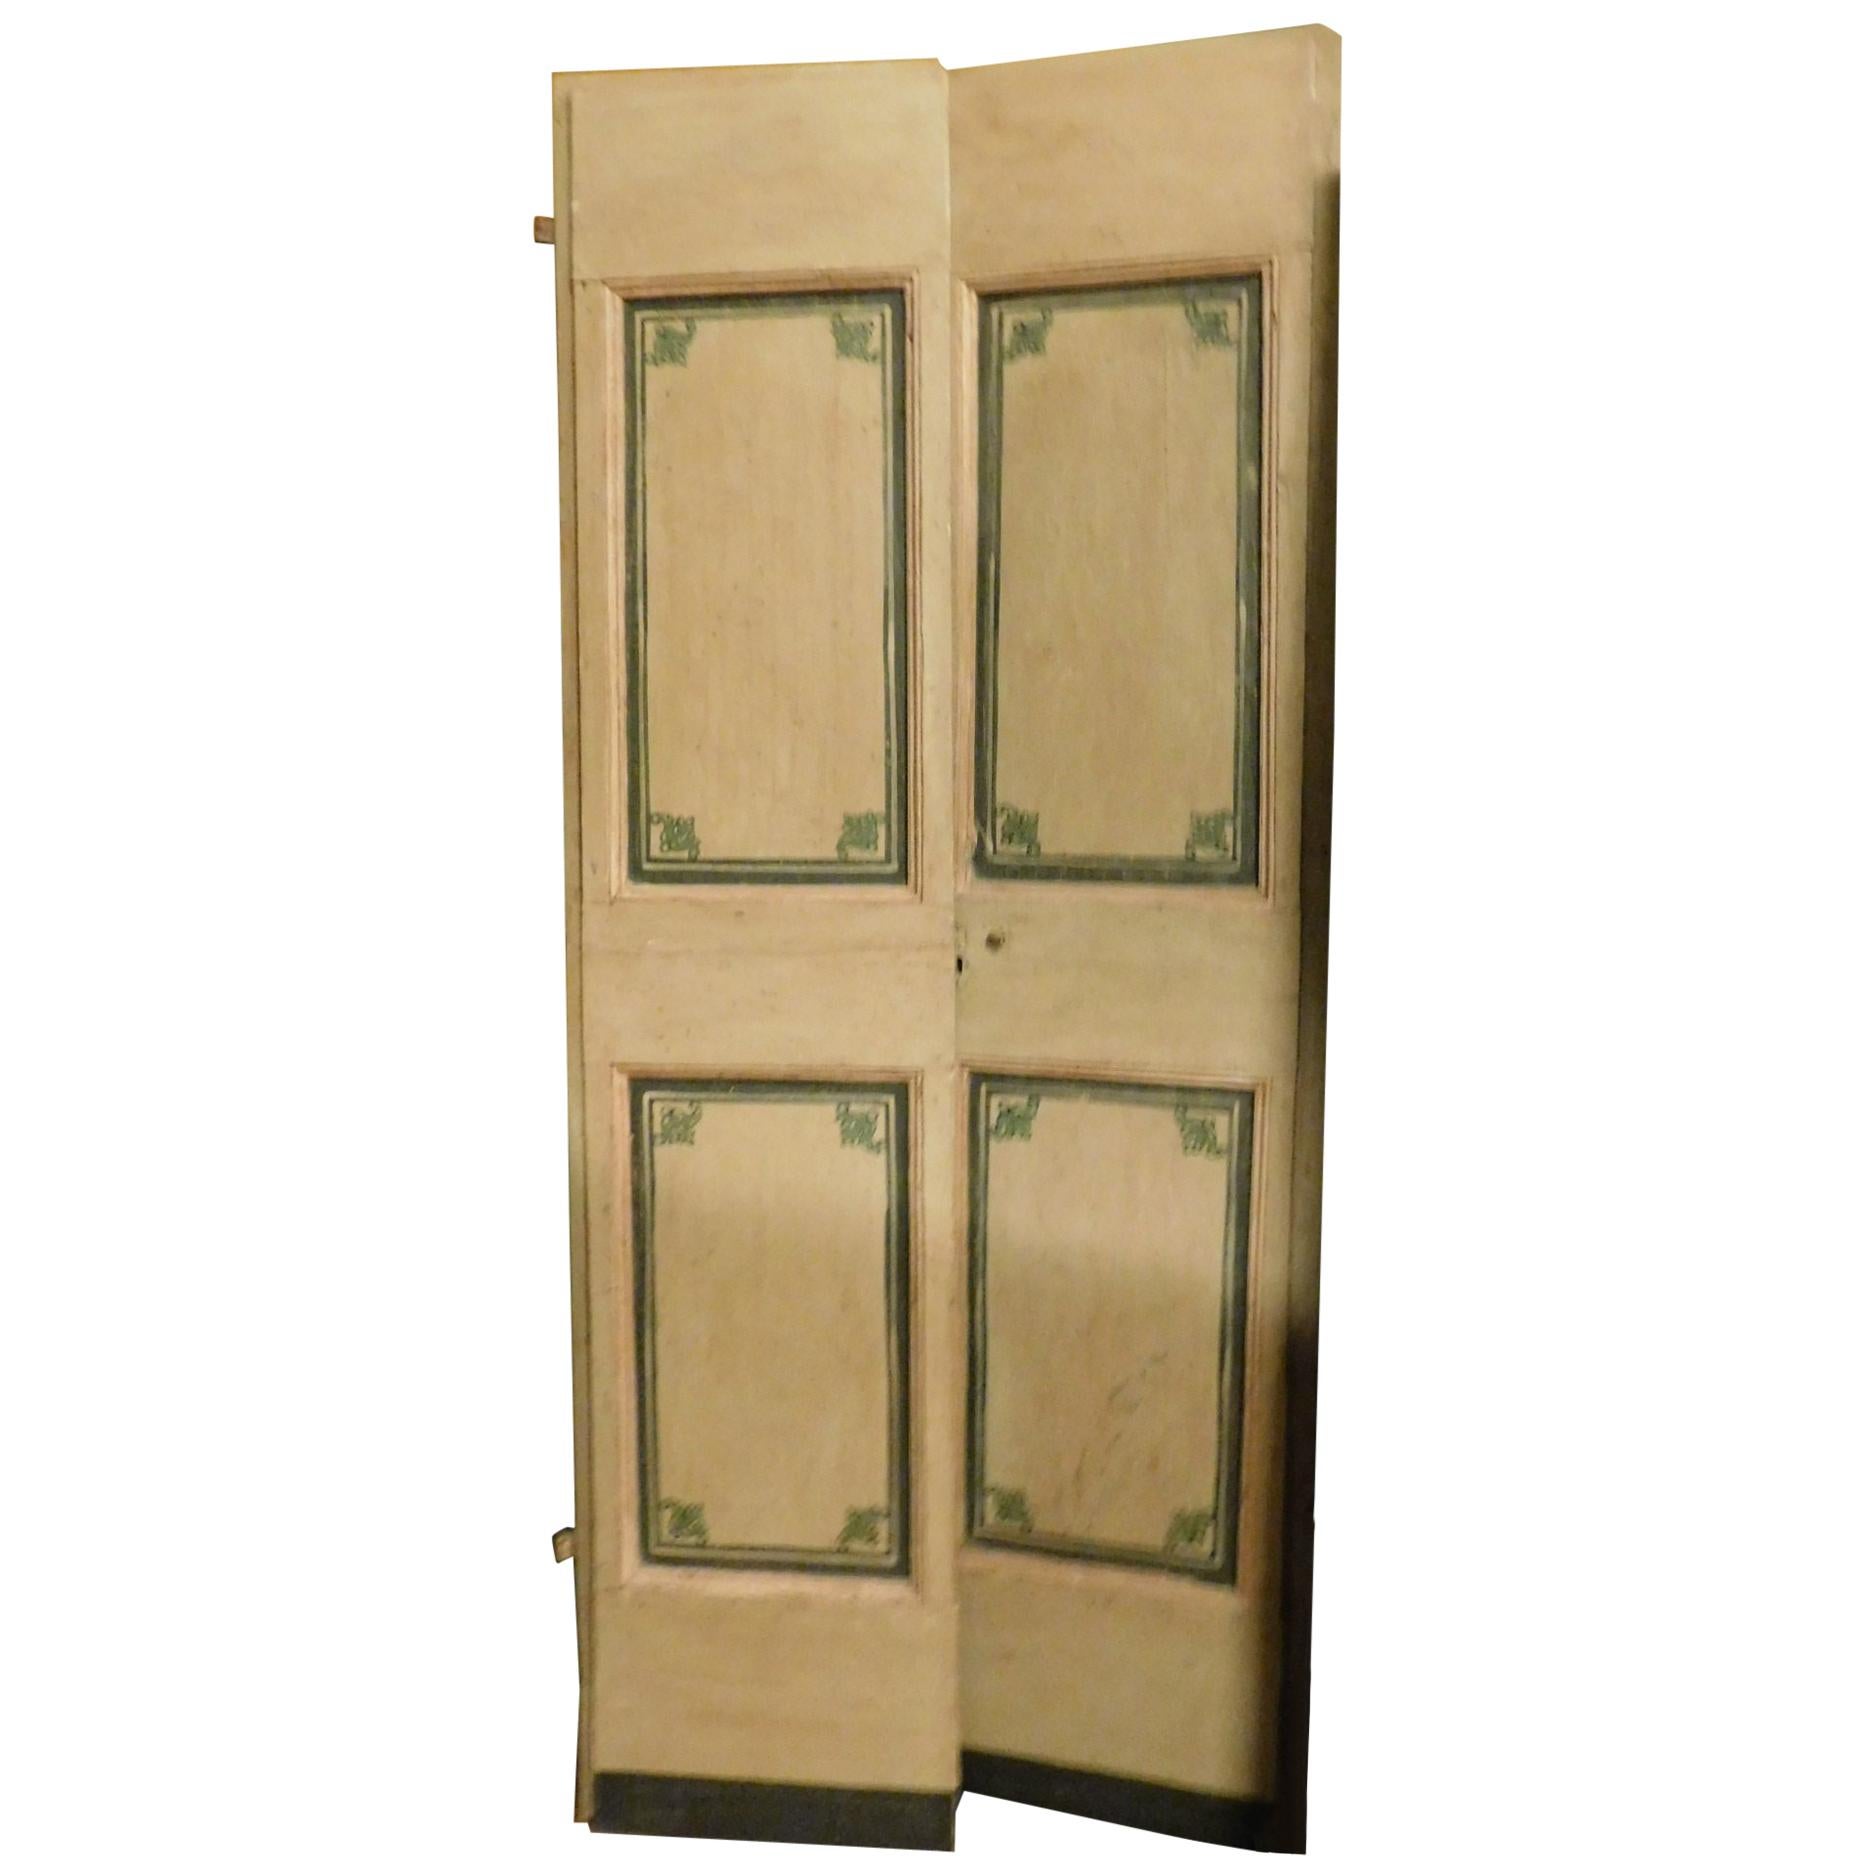 Antique Lacquered Double Door, Beige with Green Decorations, Original Irons